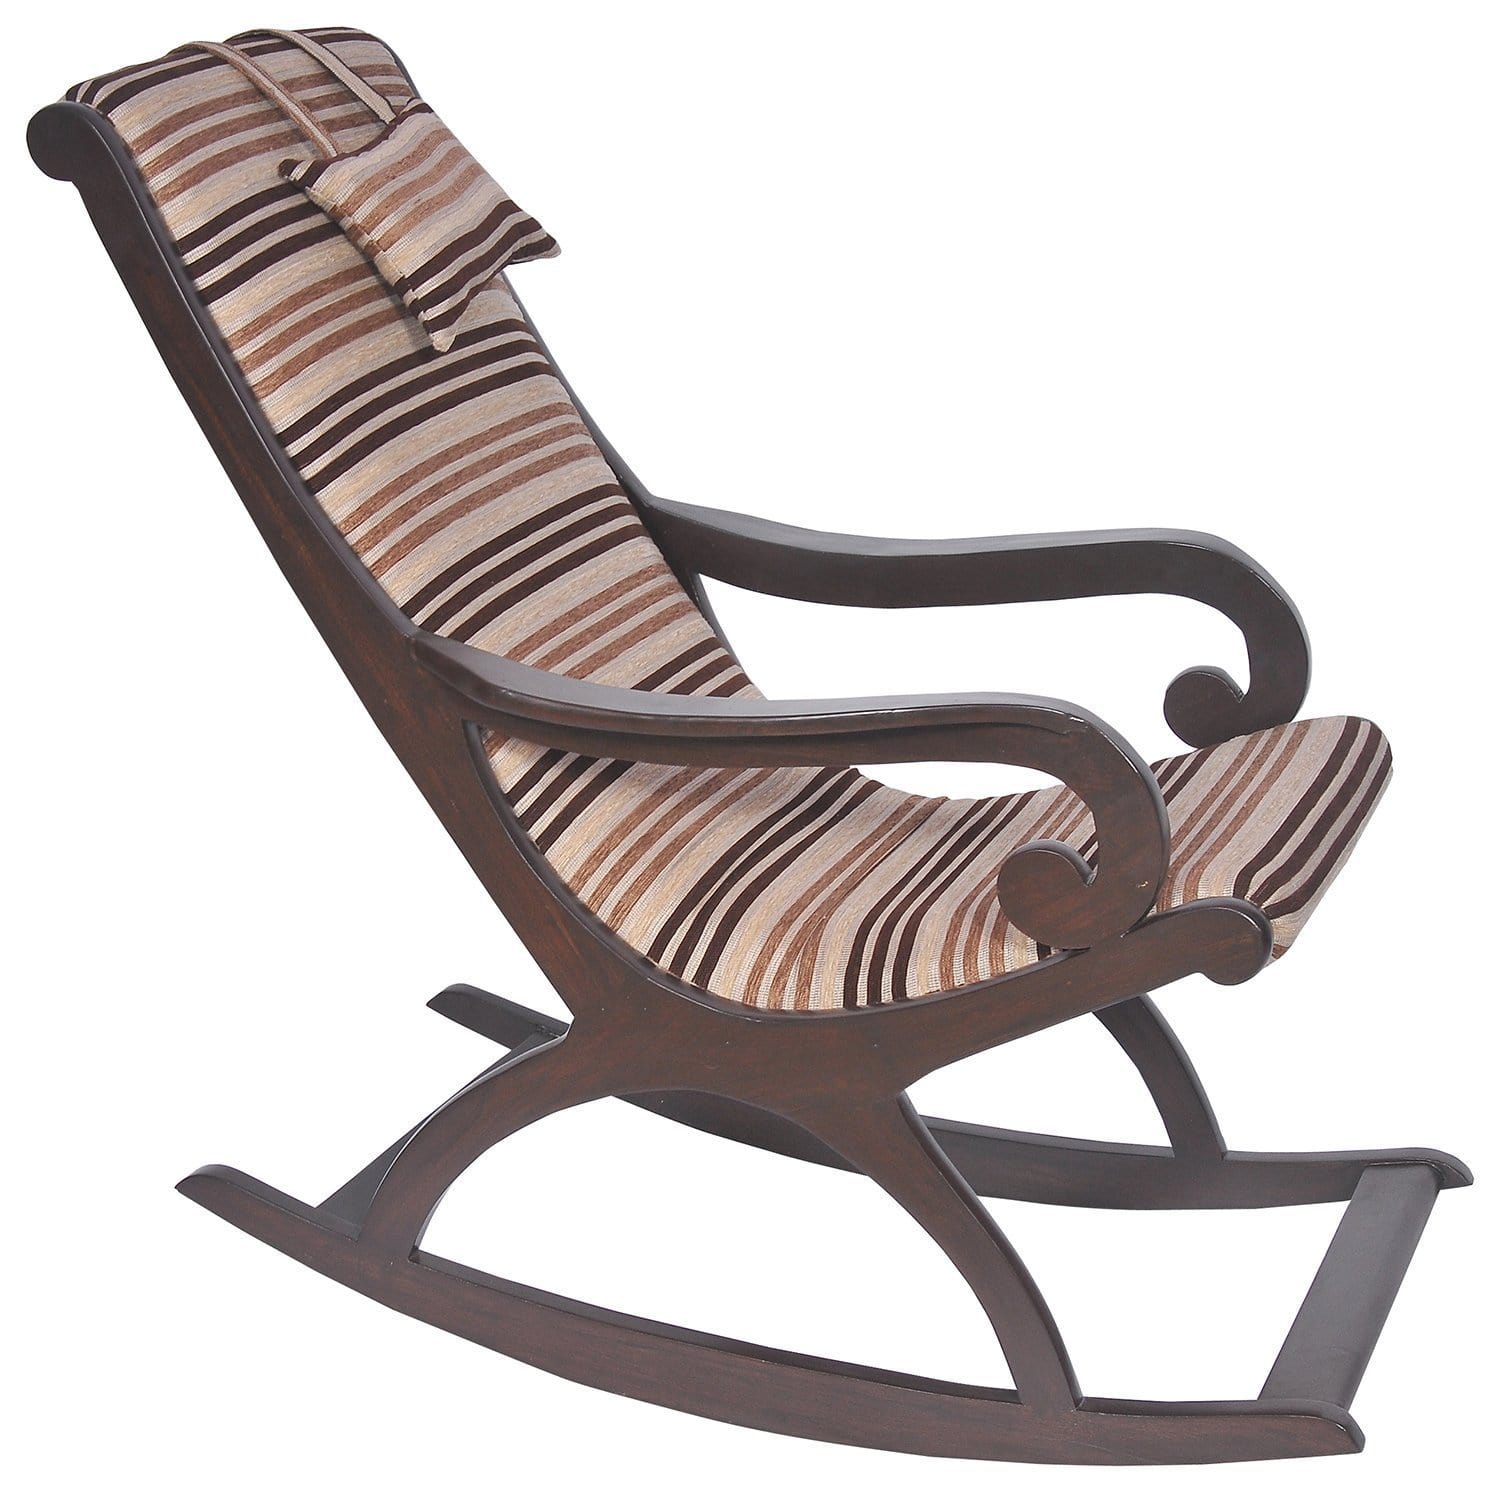 Classic Wooden Rocking Chair for Living Room and Home Garden